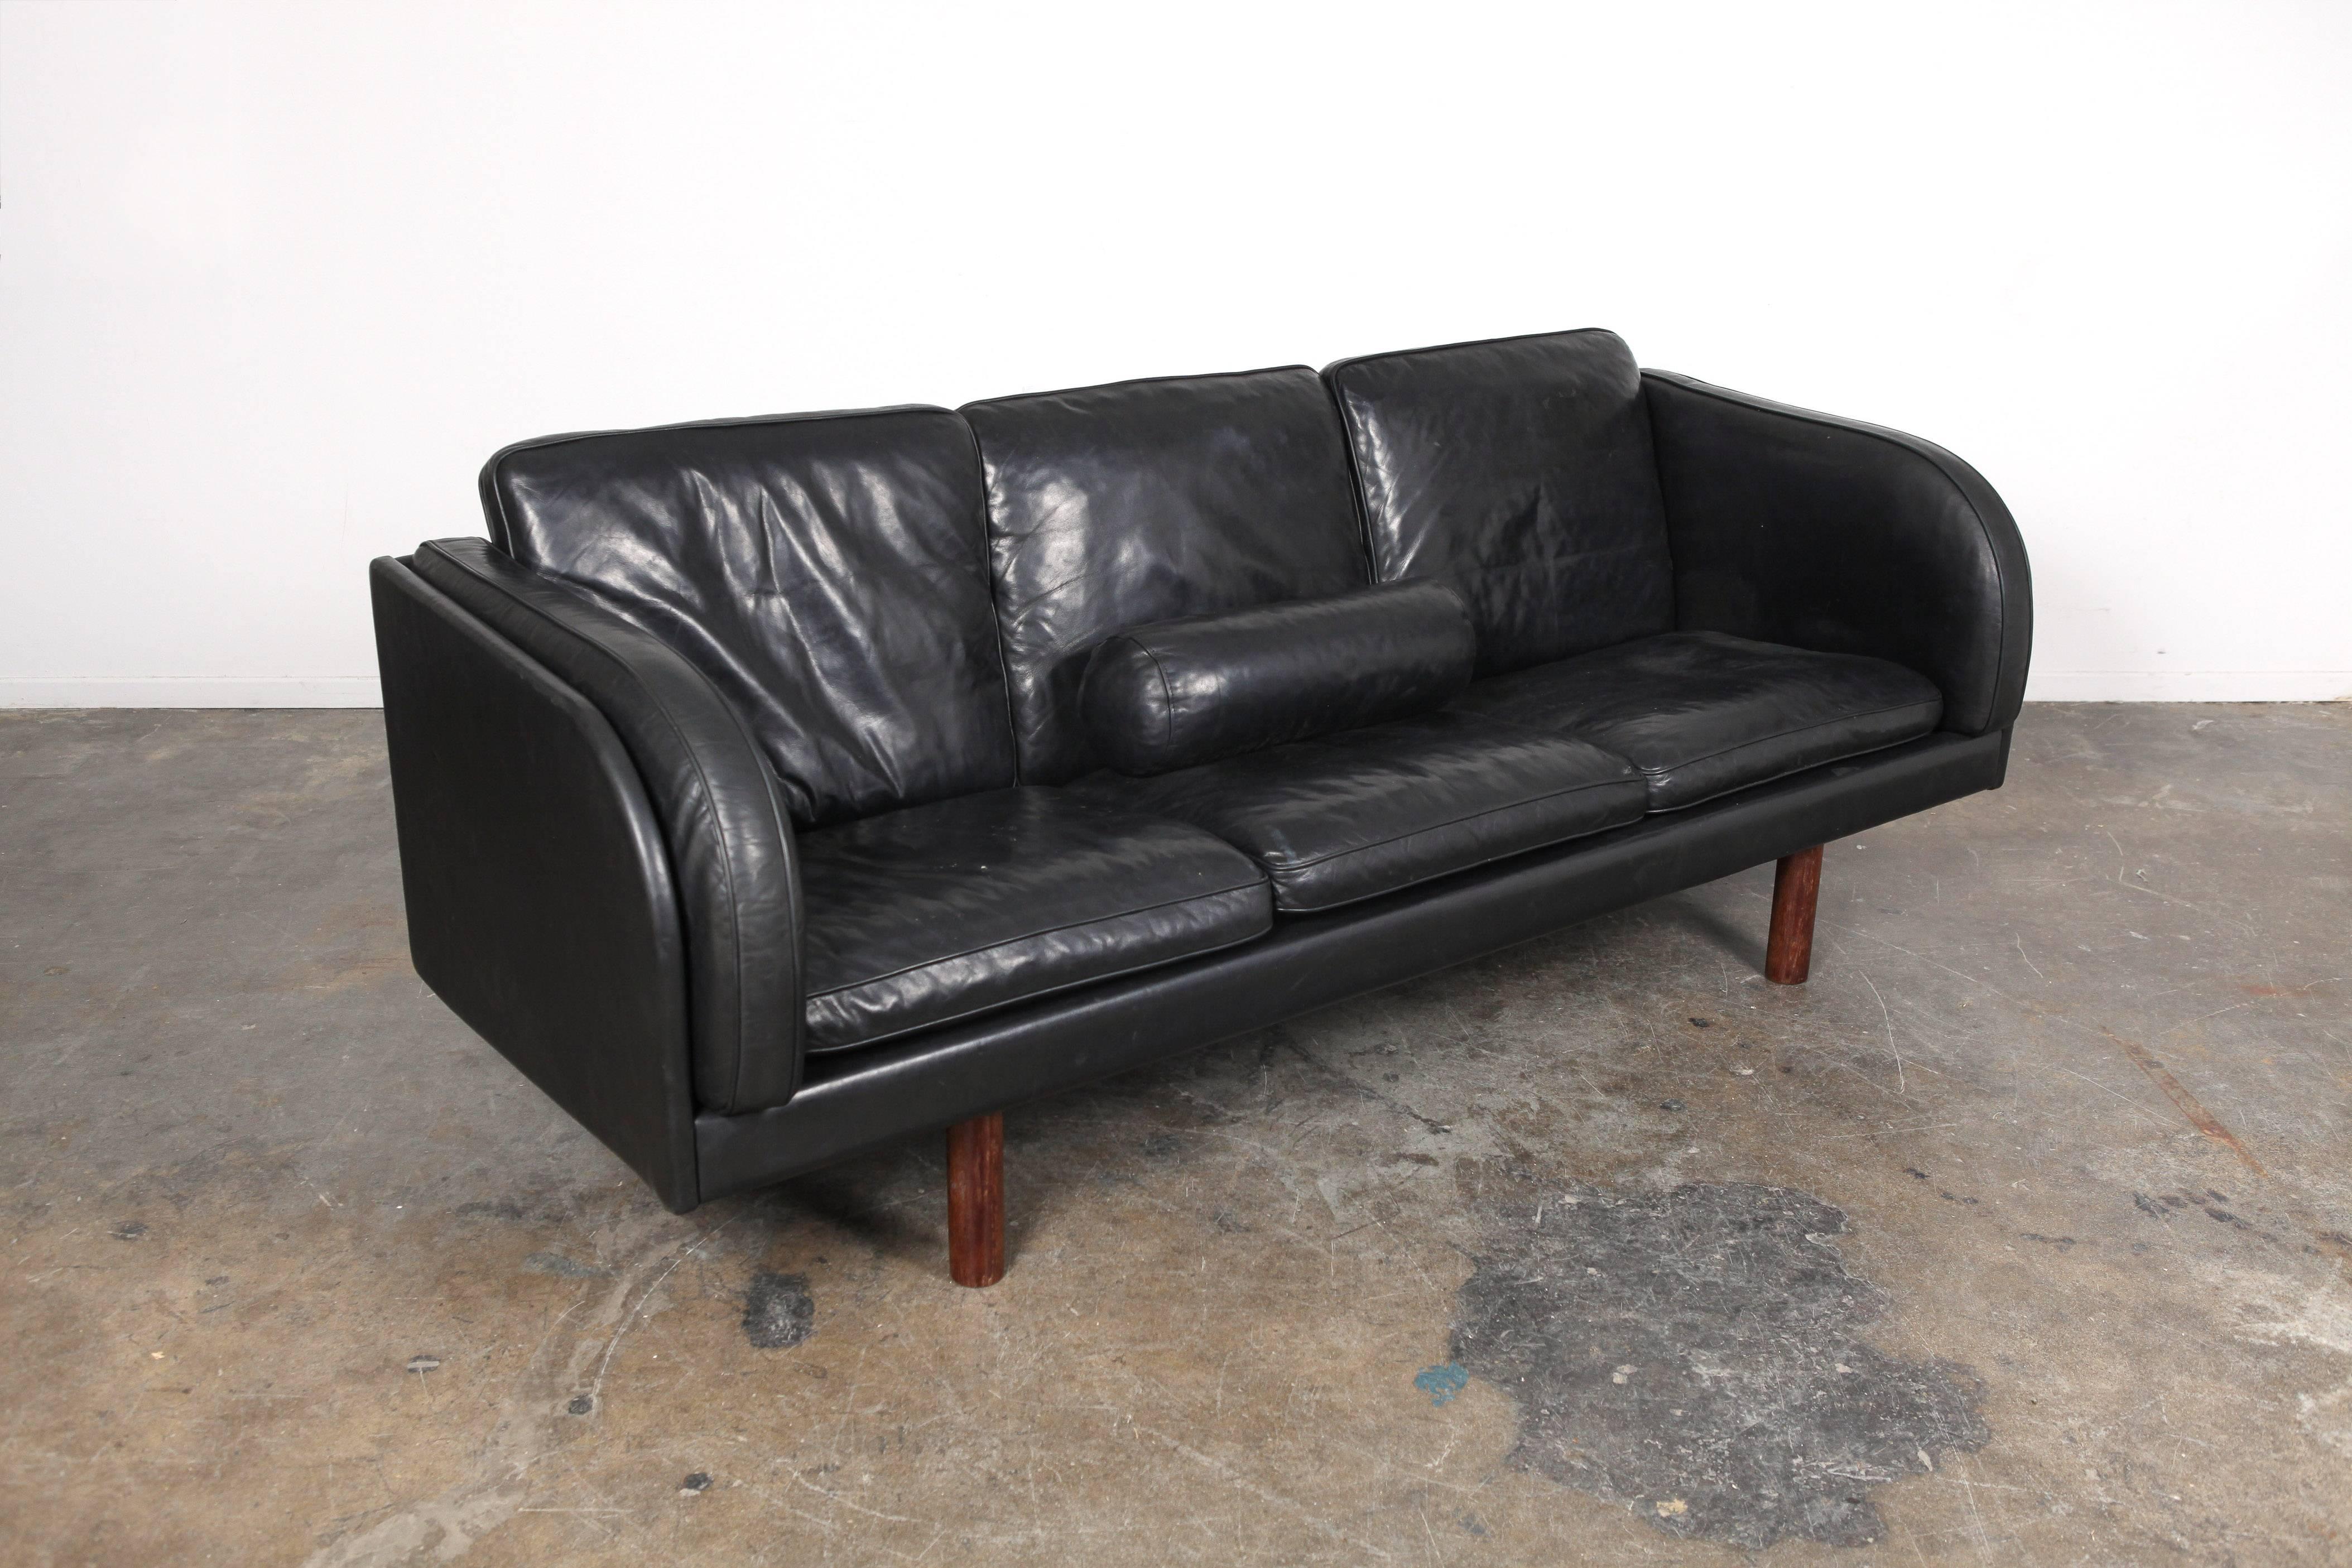 Rare Danish black leather three-seat sofa designed by Jørgen Gammelgaard, produced by Erik Jørgensen. This sofa features loose seat and back cushions, as we as a single bolster pillow and cylindrical wooden legs.